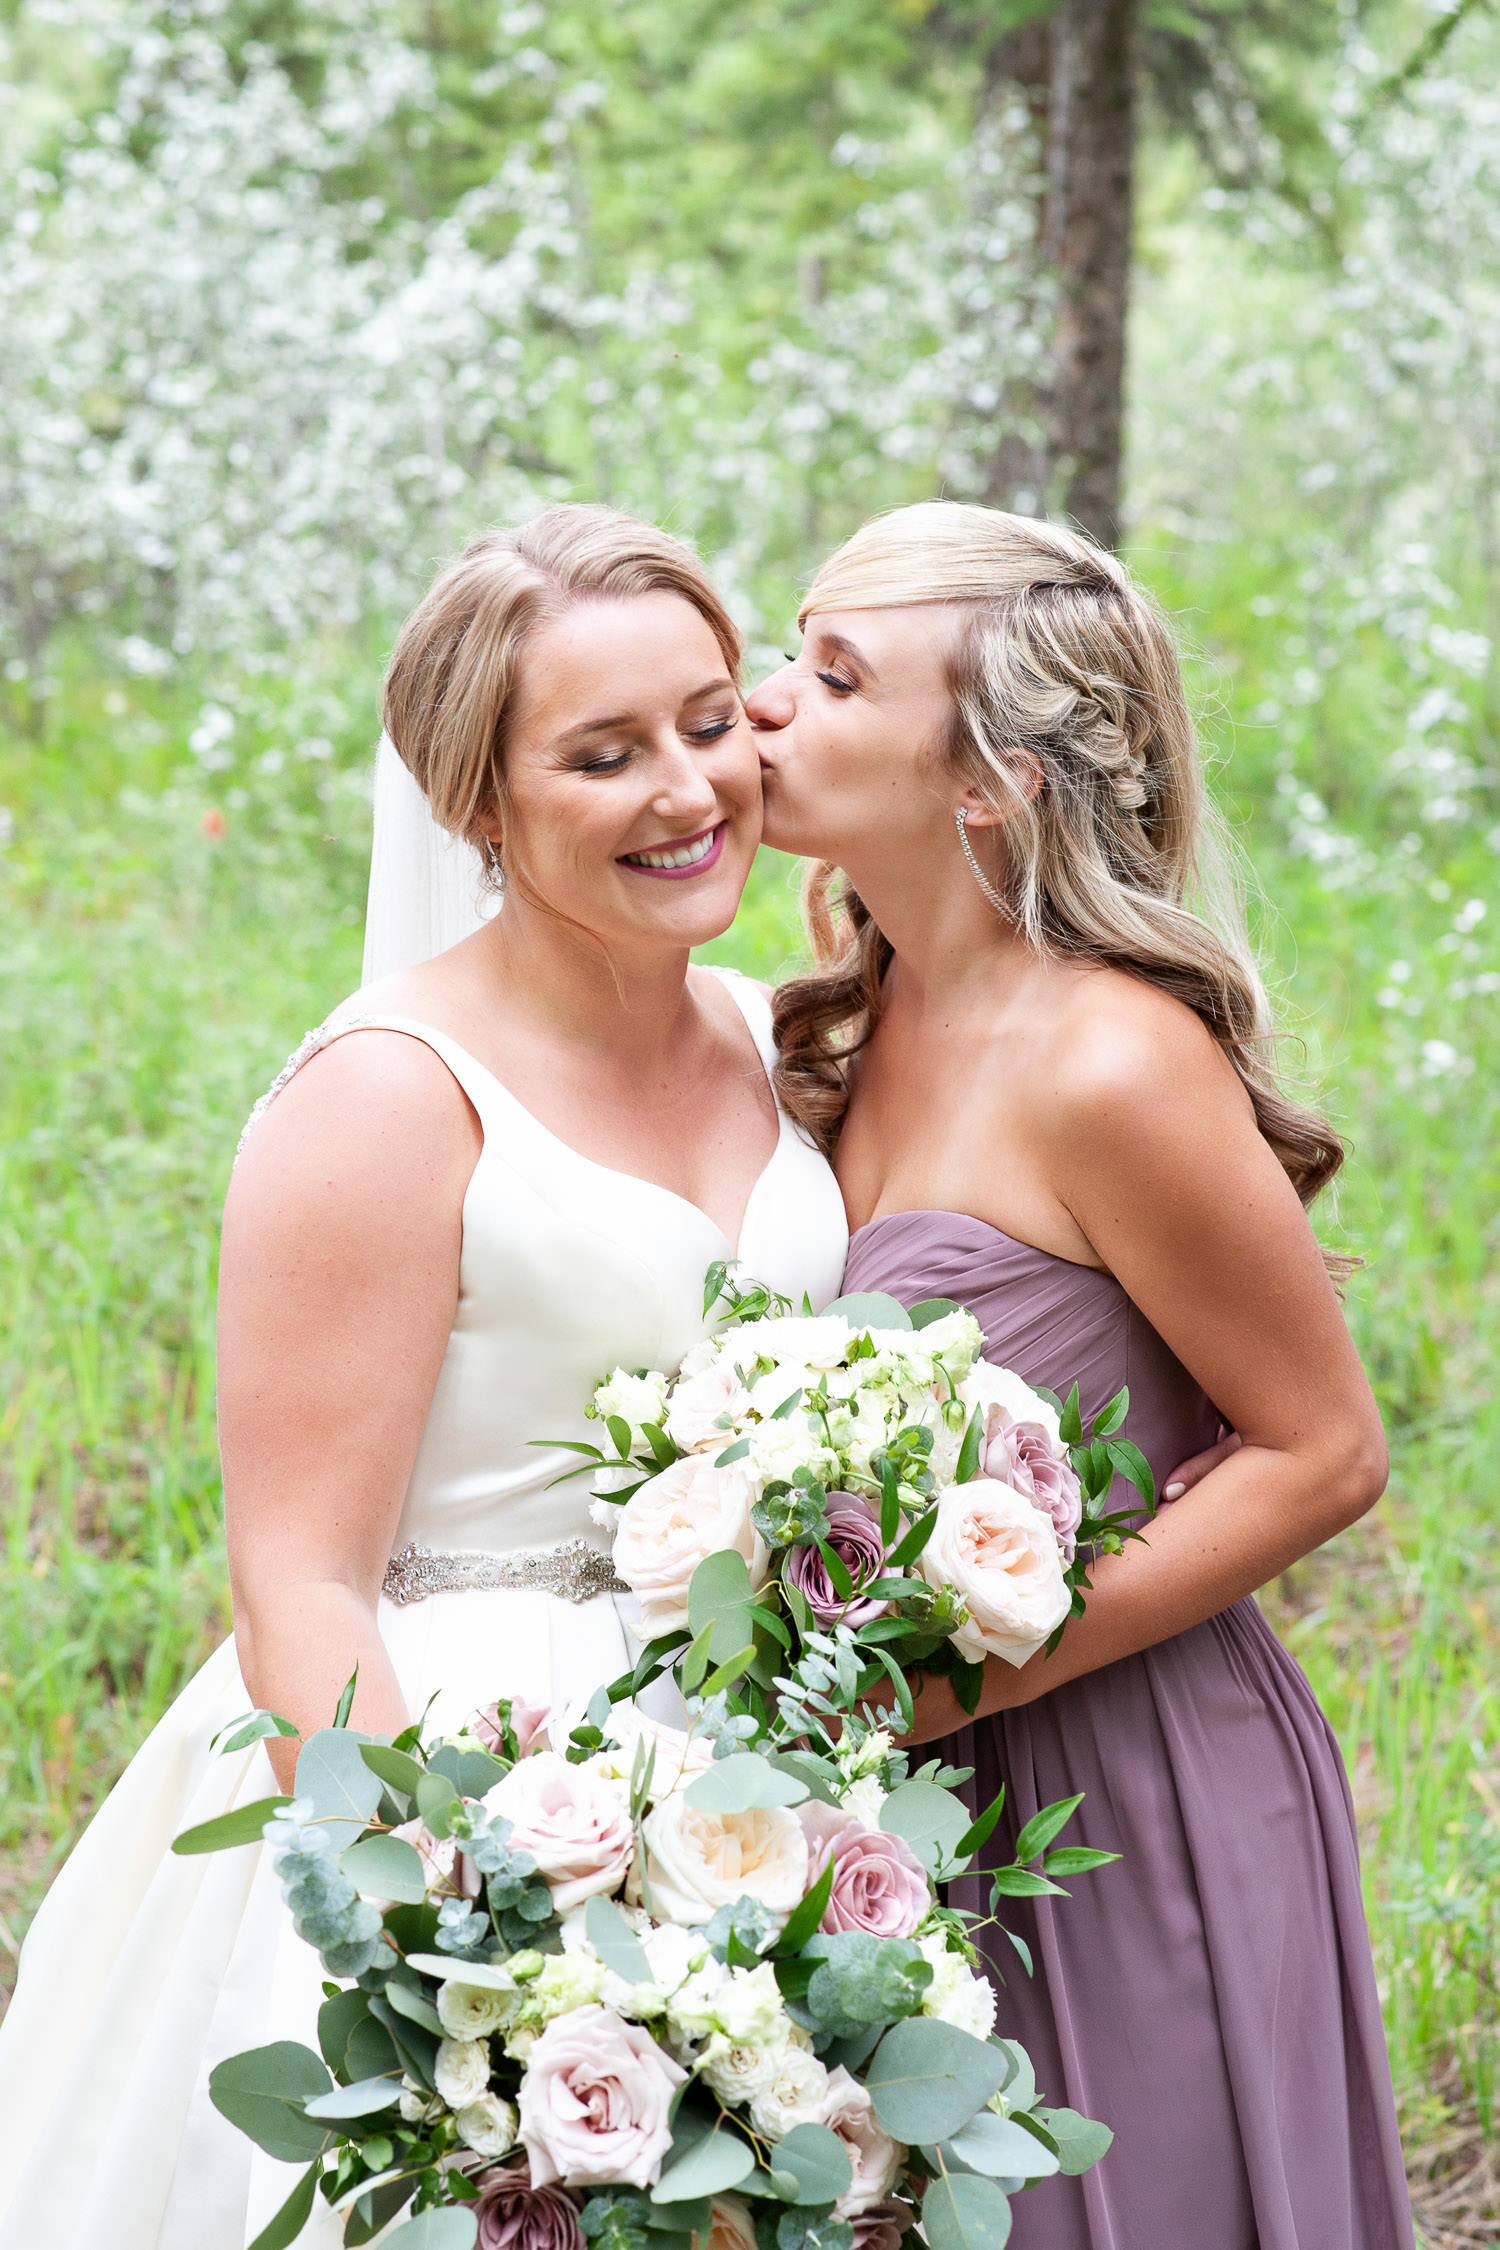 Bride with her bridesmaid captured by Canmore wedding photographer Tara Whittaker